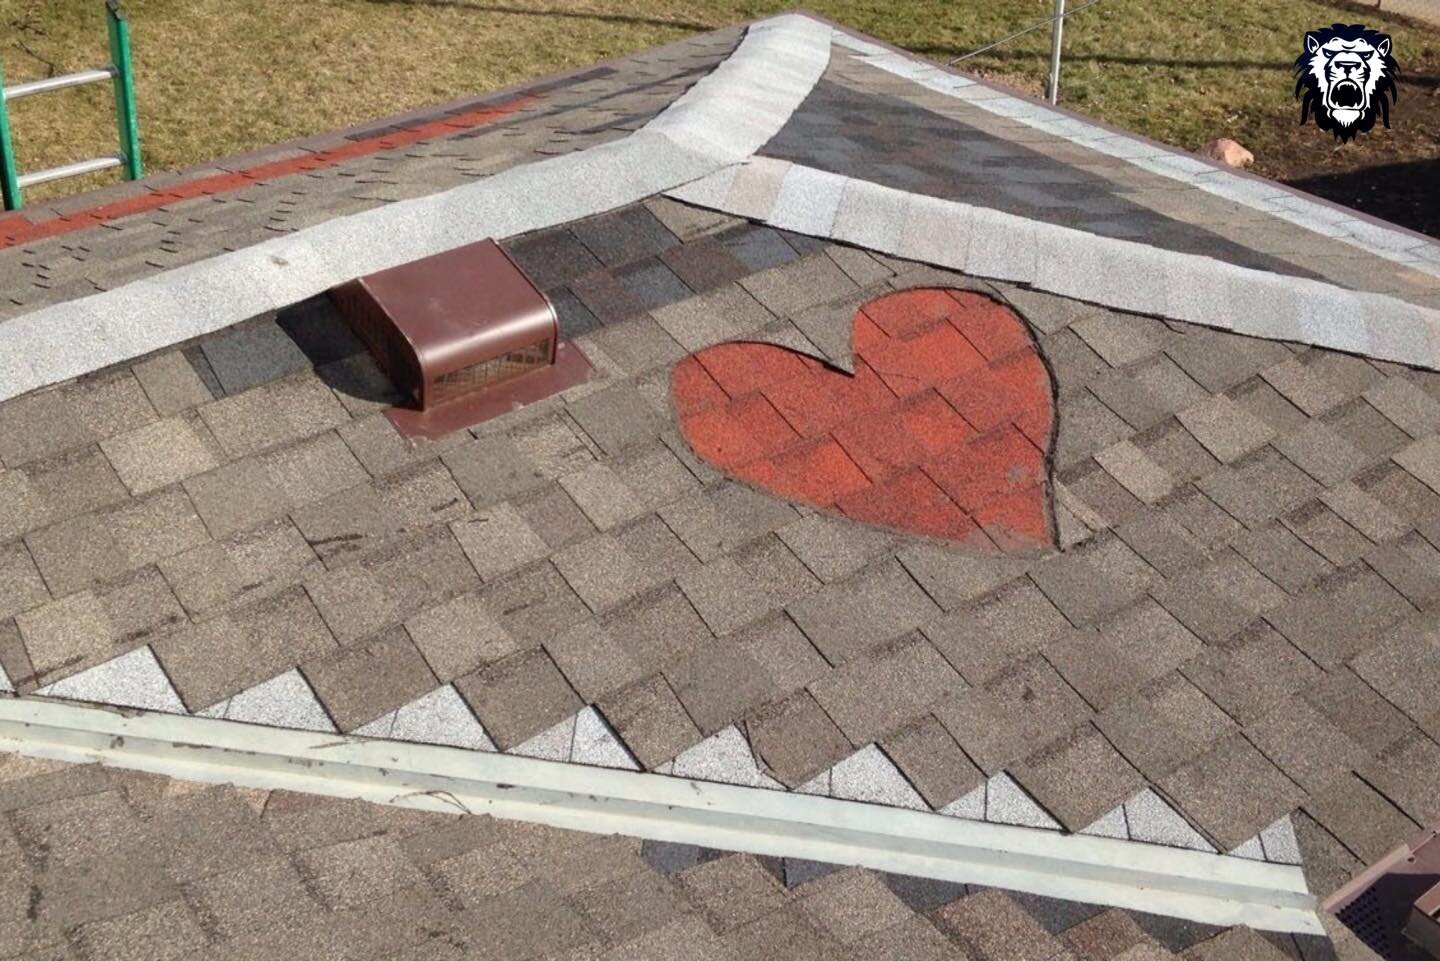 Are you Shingle &amp; ready to Mingle!? 😻

Happy Valentines Day ❣️

Contact us to set up a date to check out your roof!

@lyonsroofing
(610) 623-8505
www.lyonsroofing.org